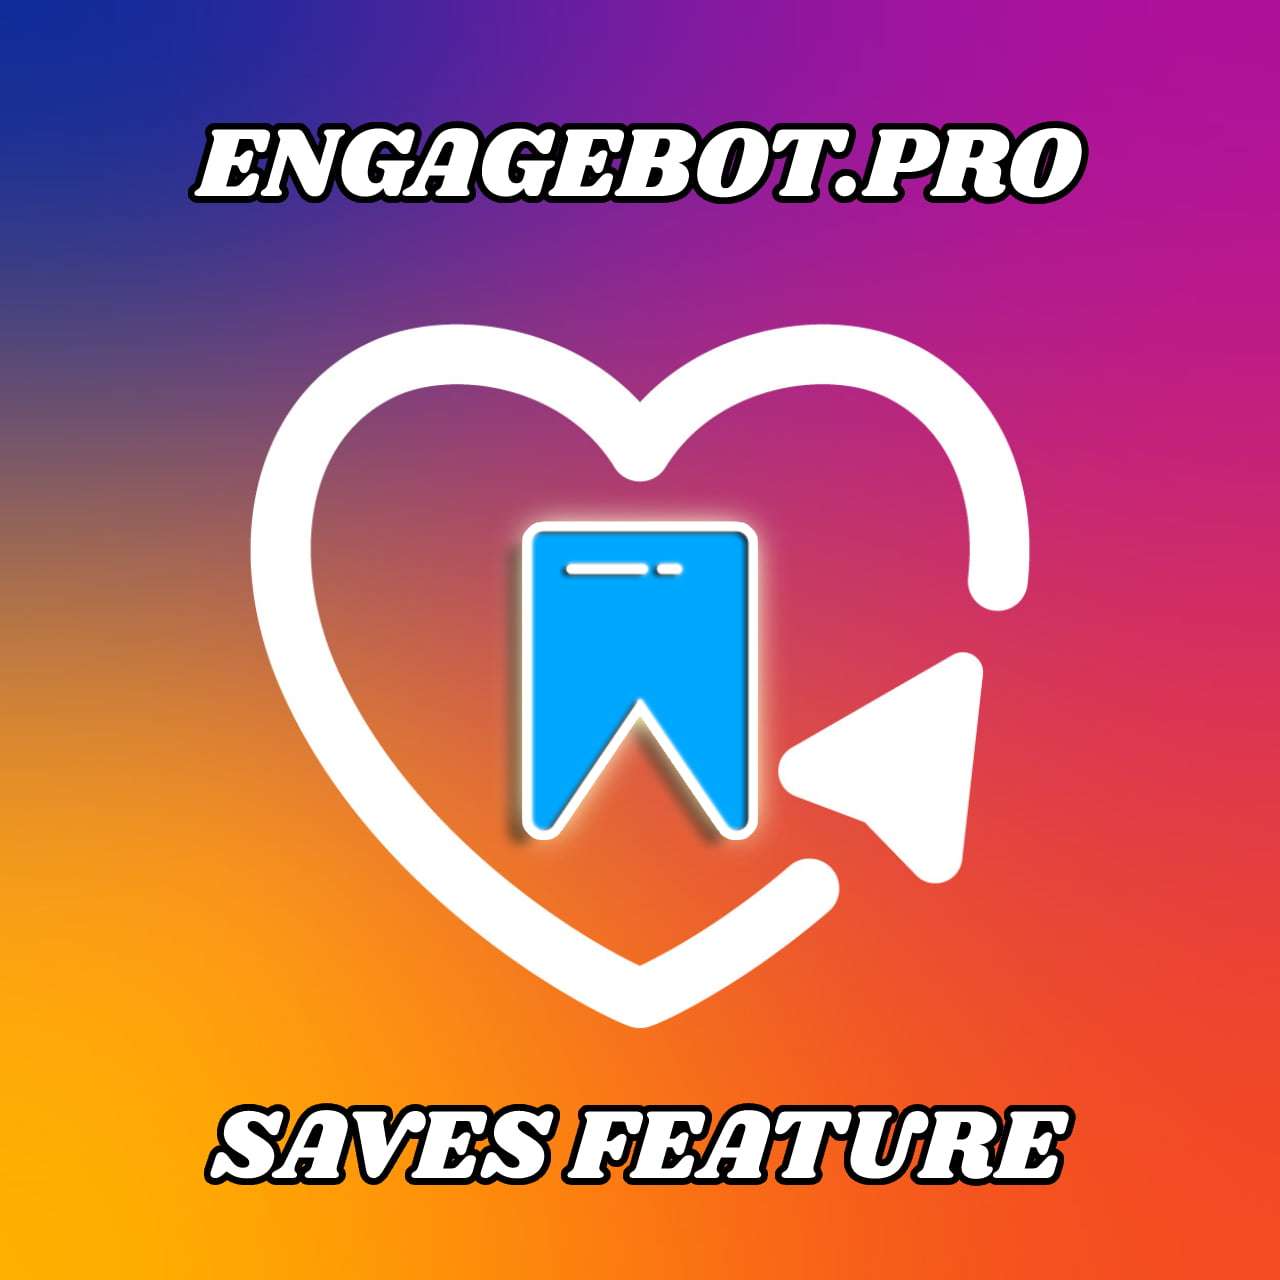 After months of work, the Saves Checking in EngageBot.PRO feature is released in PUBLIC BETA: Try it out now and let us know your doubts and opinions!